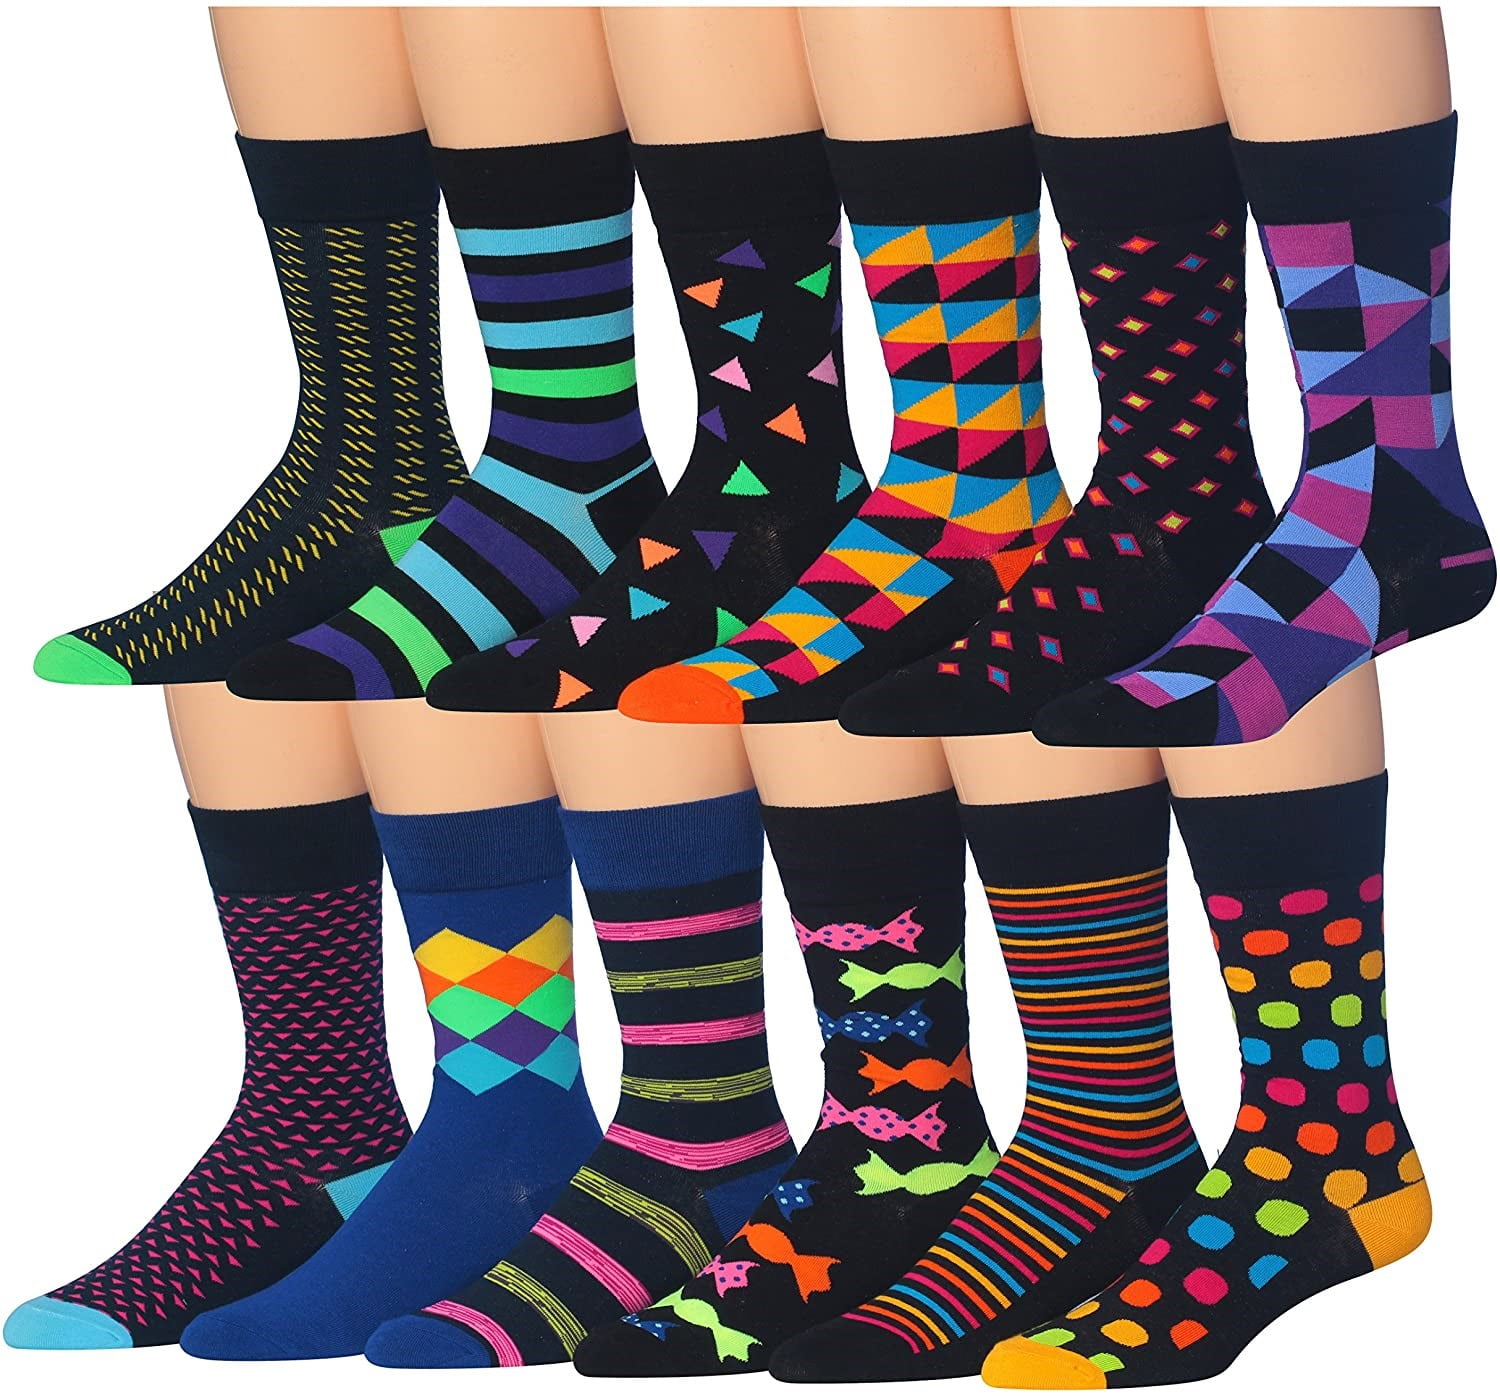 James Fiallo Mens 12-Pairs Funny Funky Crazy Novelty Colorful Patterned ...